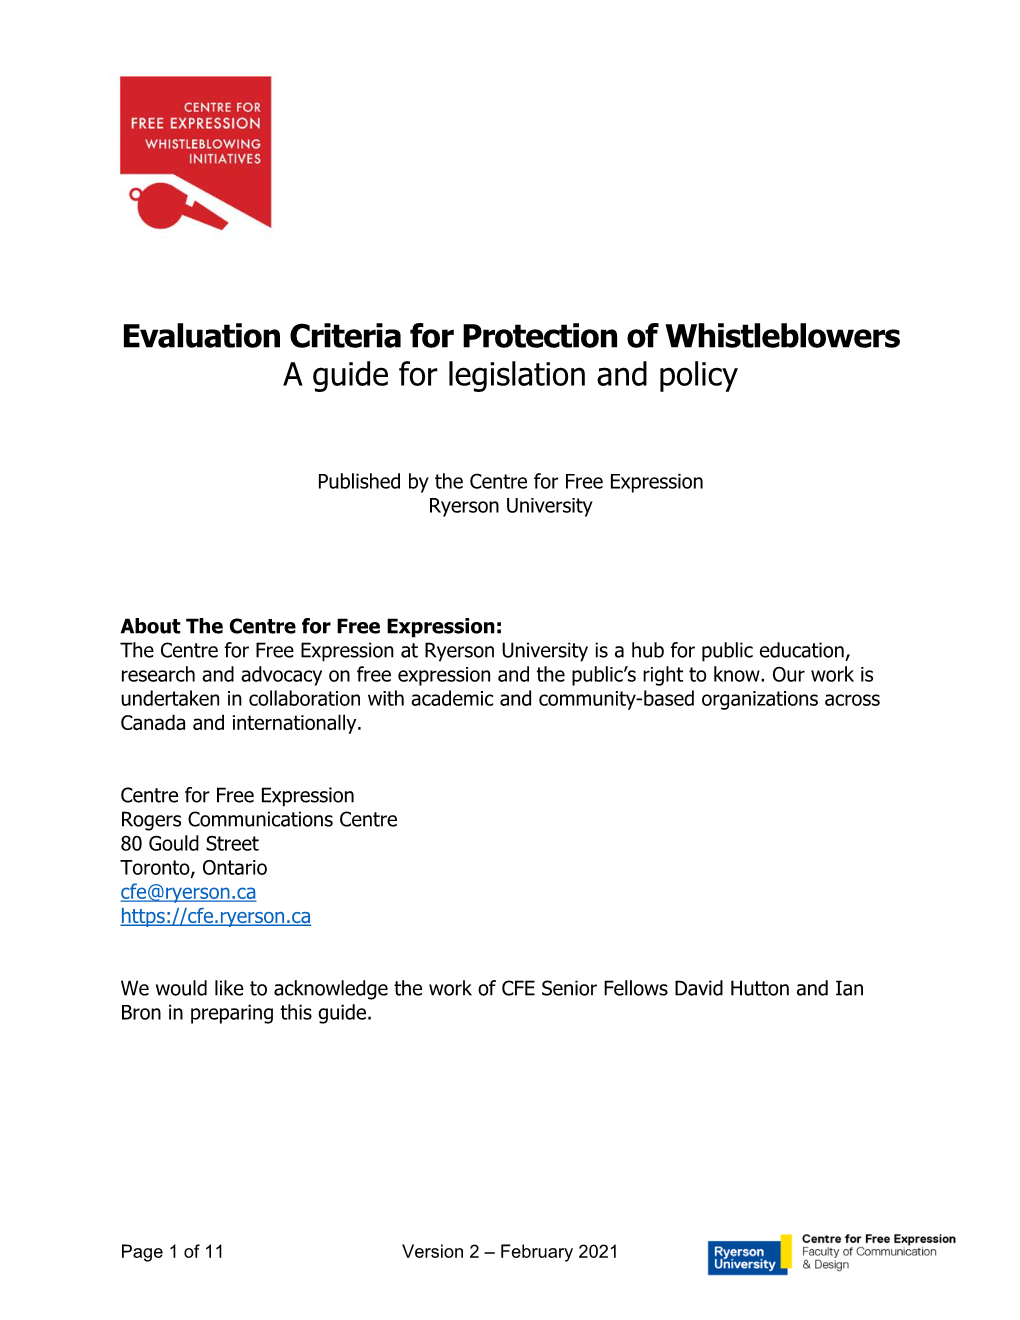 Evaluation Criteria for Protection of Whistleblowers a Guide for Legislation and Policy